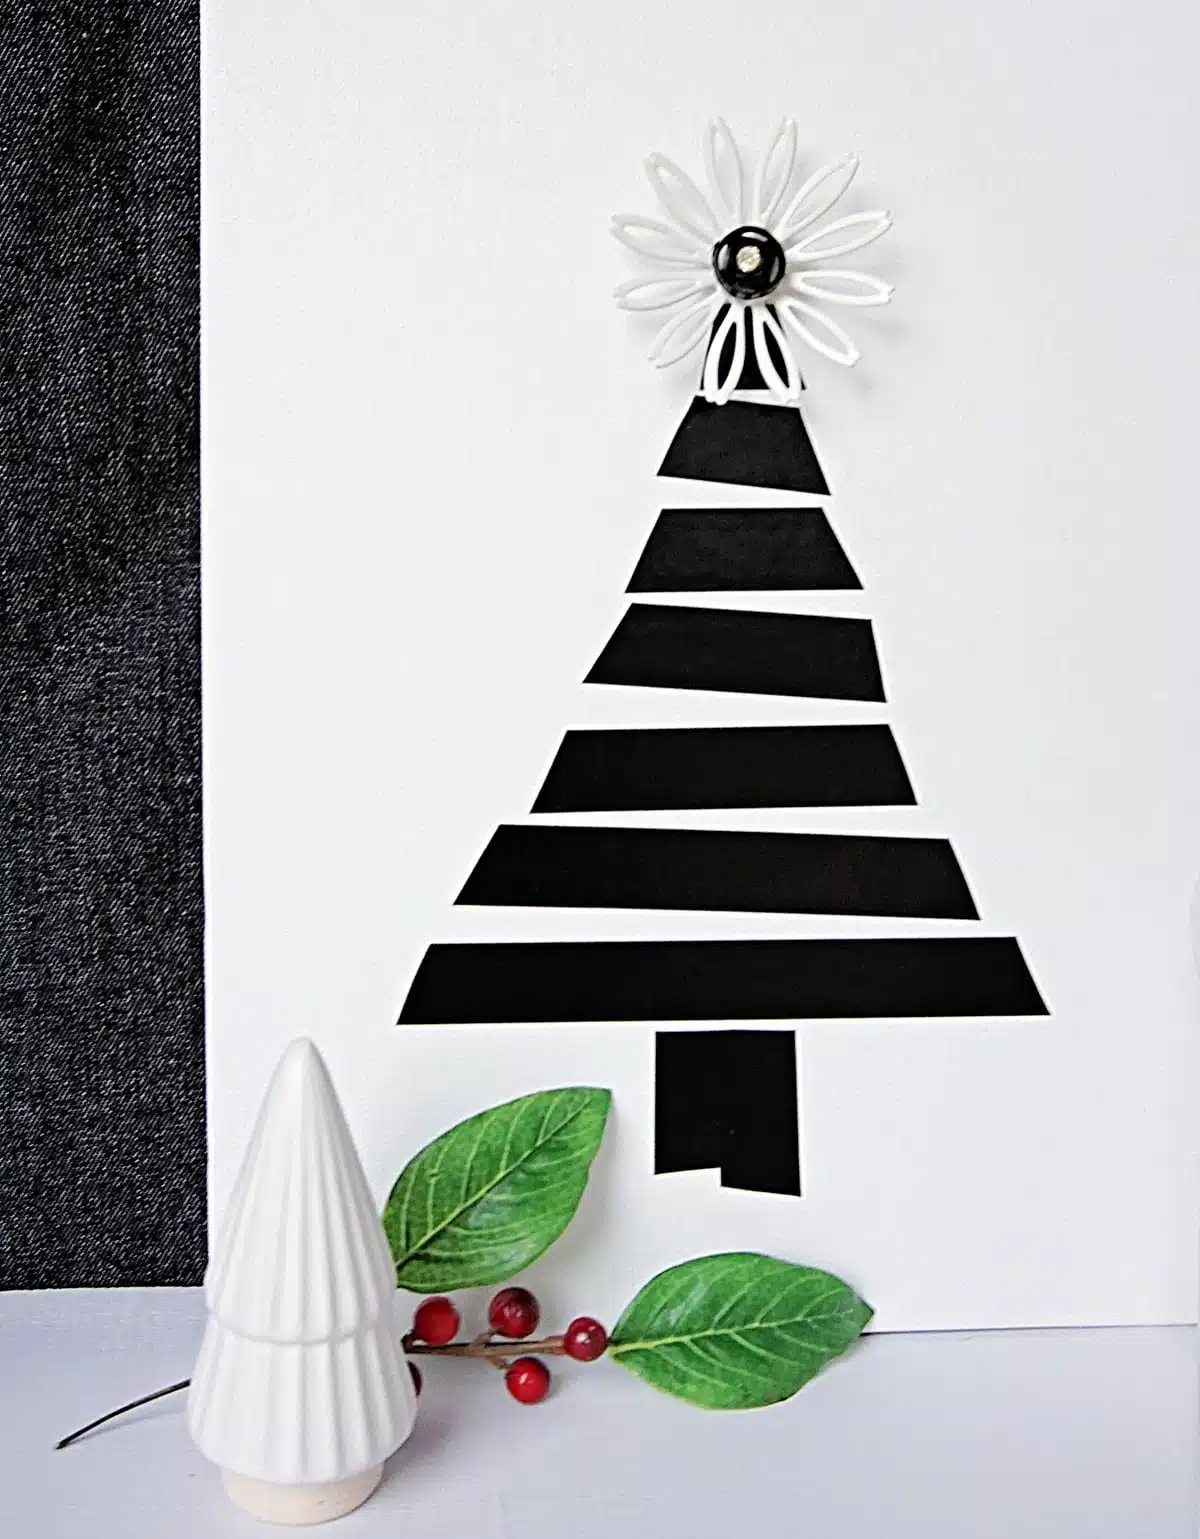 Simple Christmas Decor Made With Black Electrical Tape